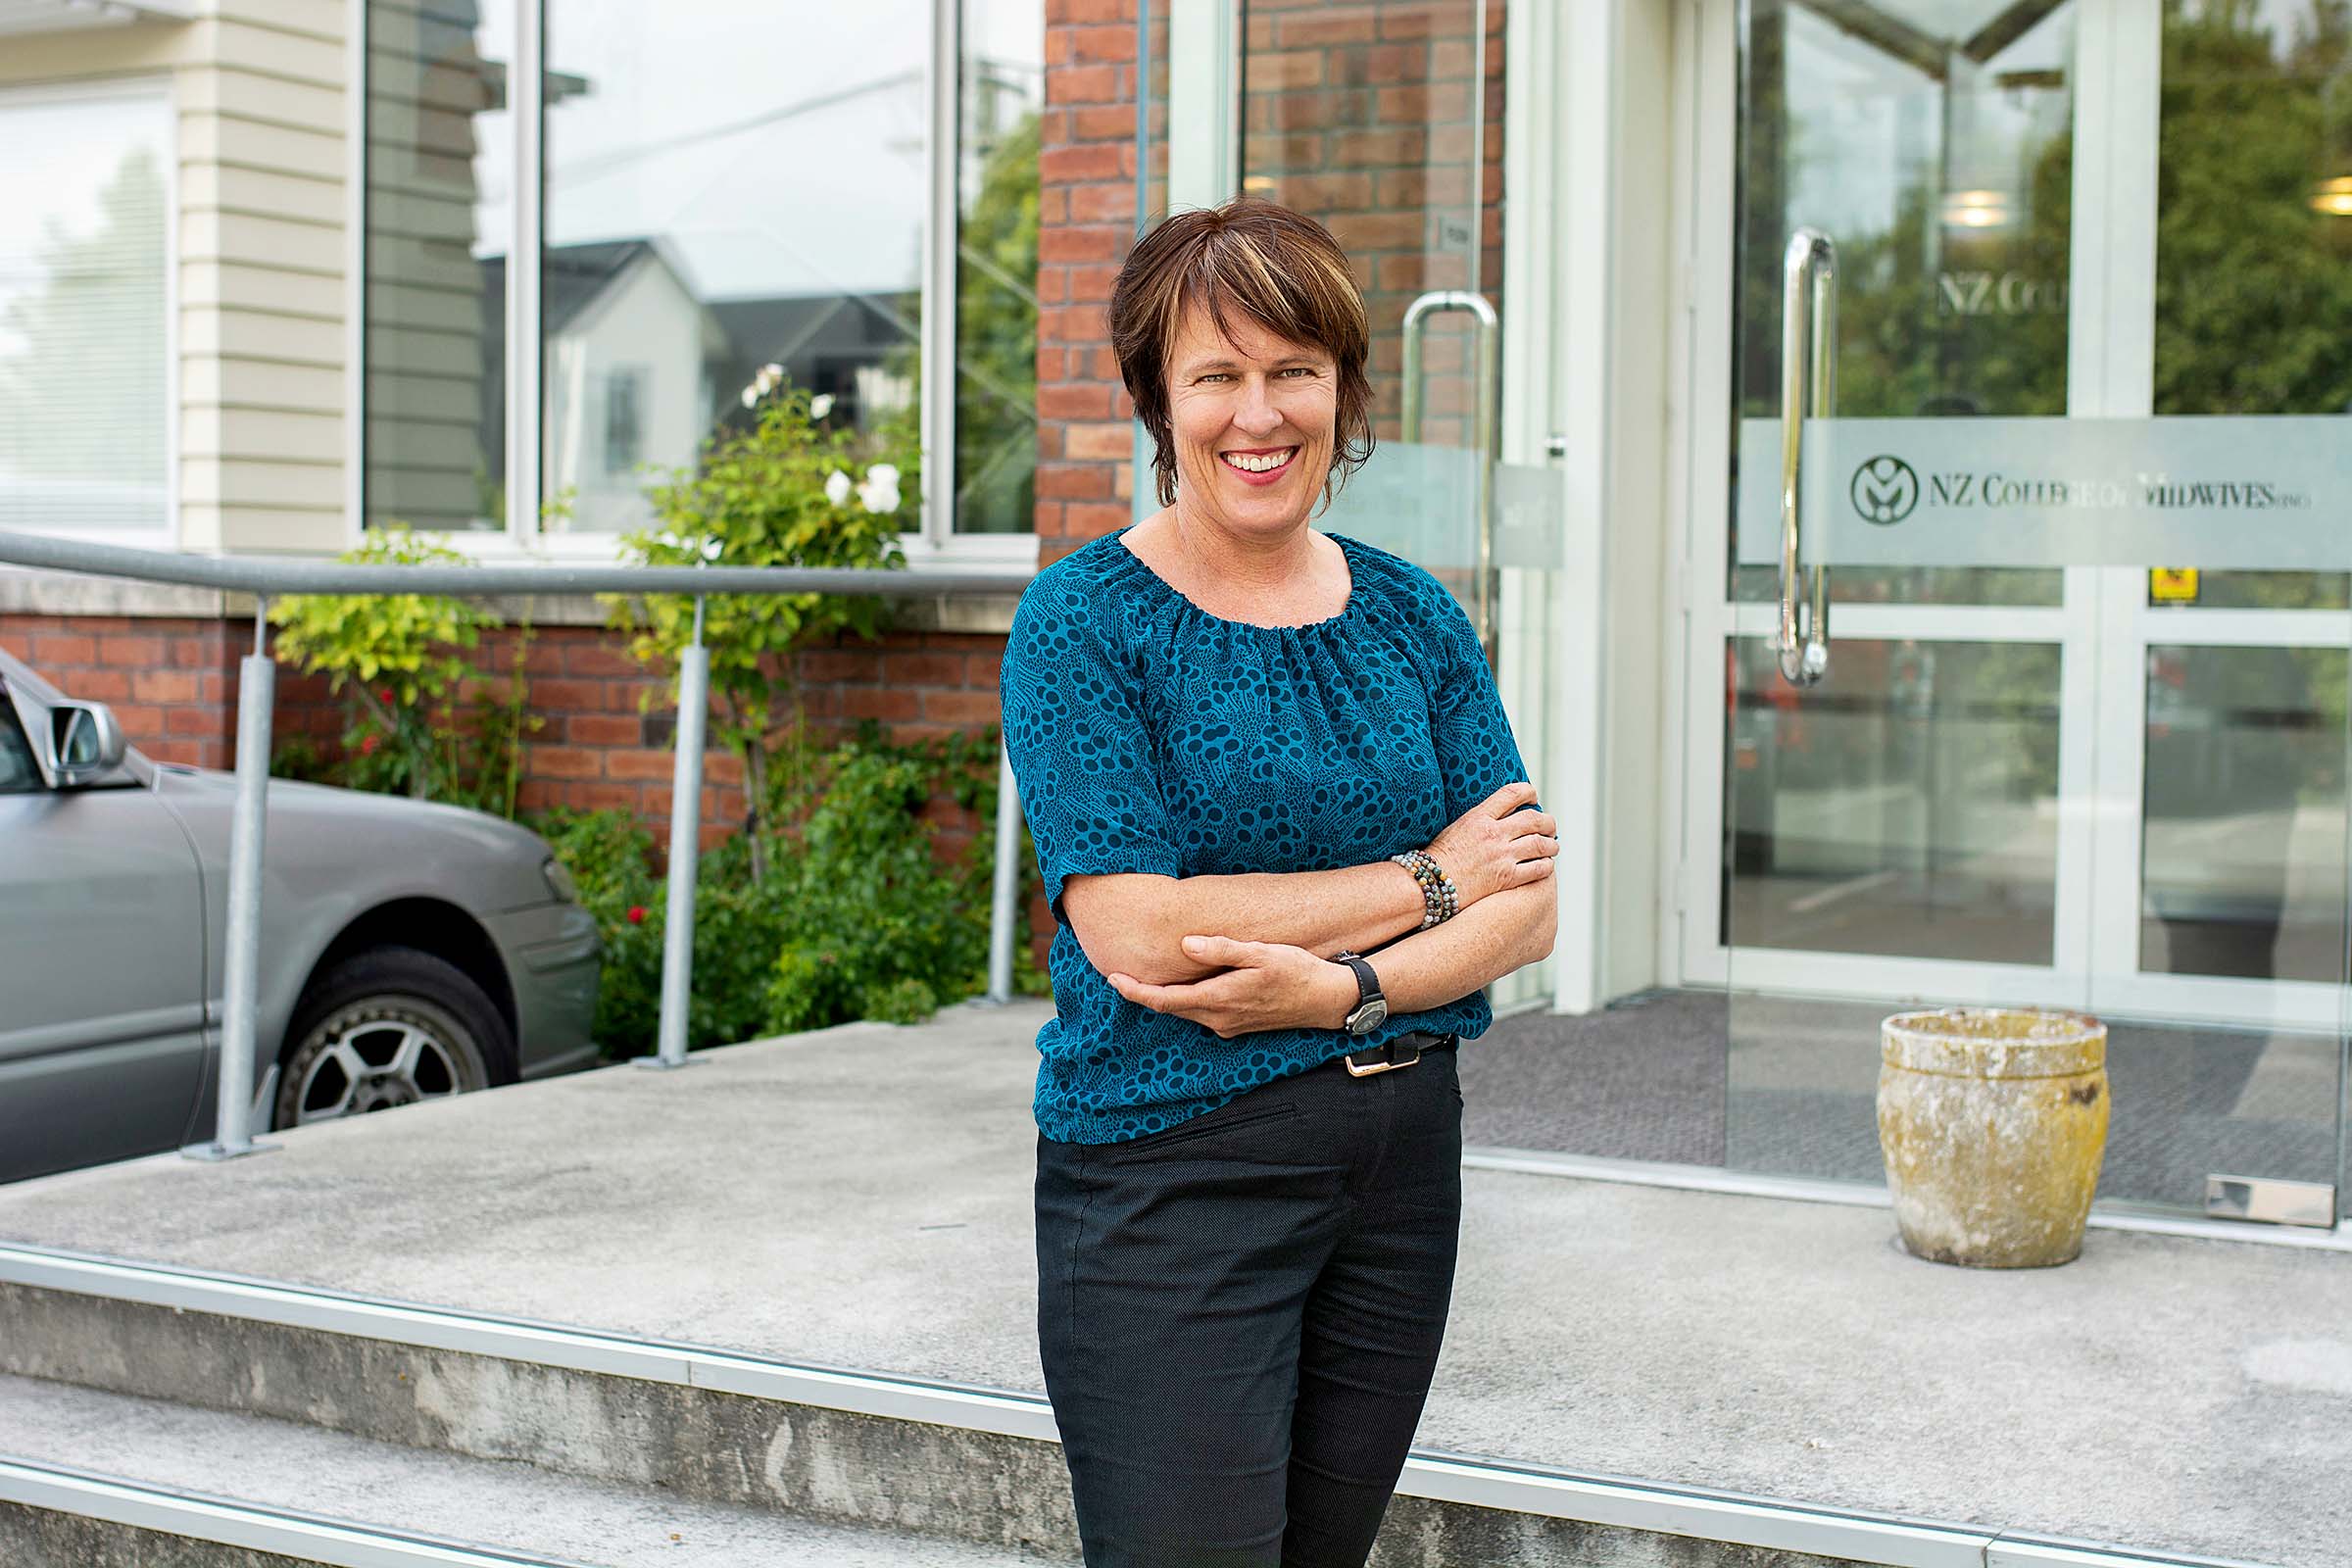 NZ College of Midwives chief executive Alison Eddy